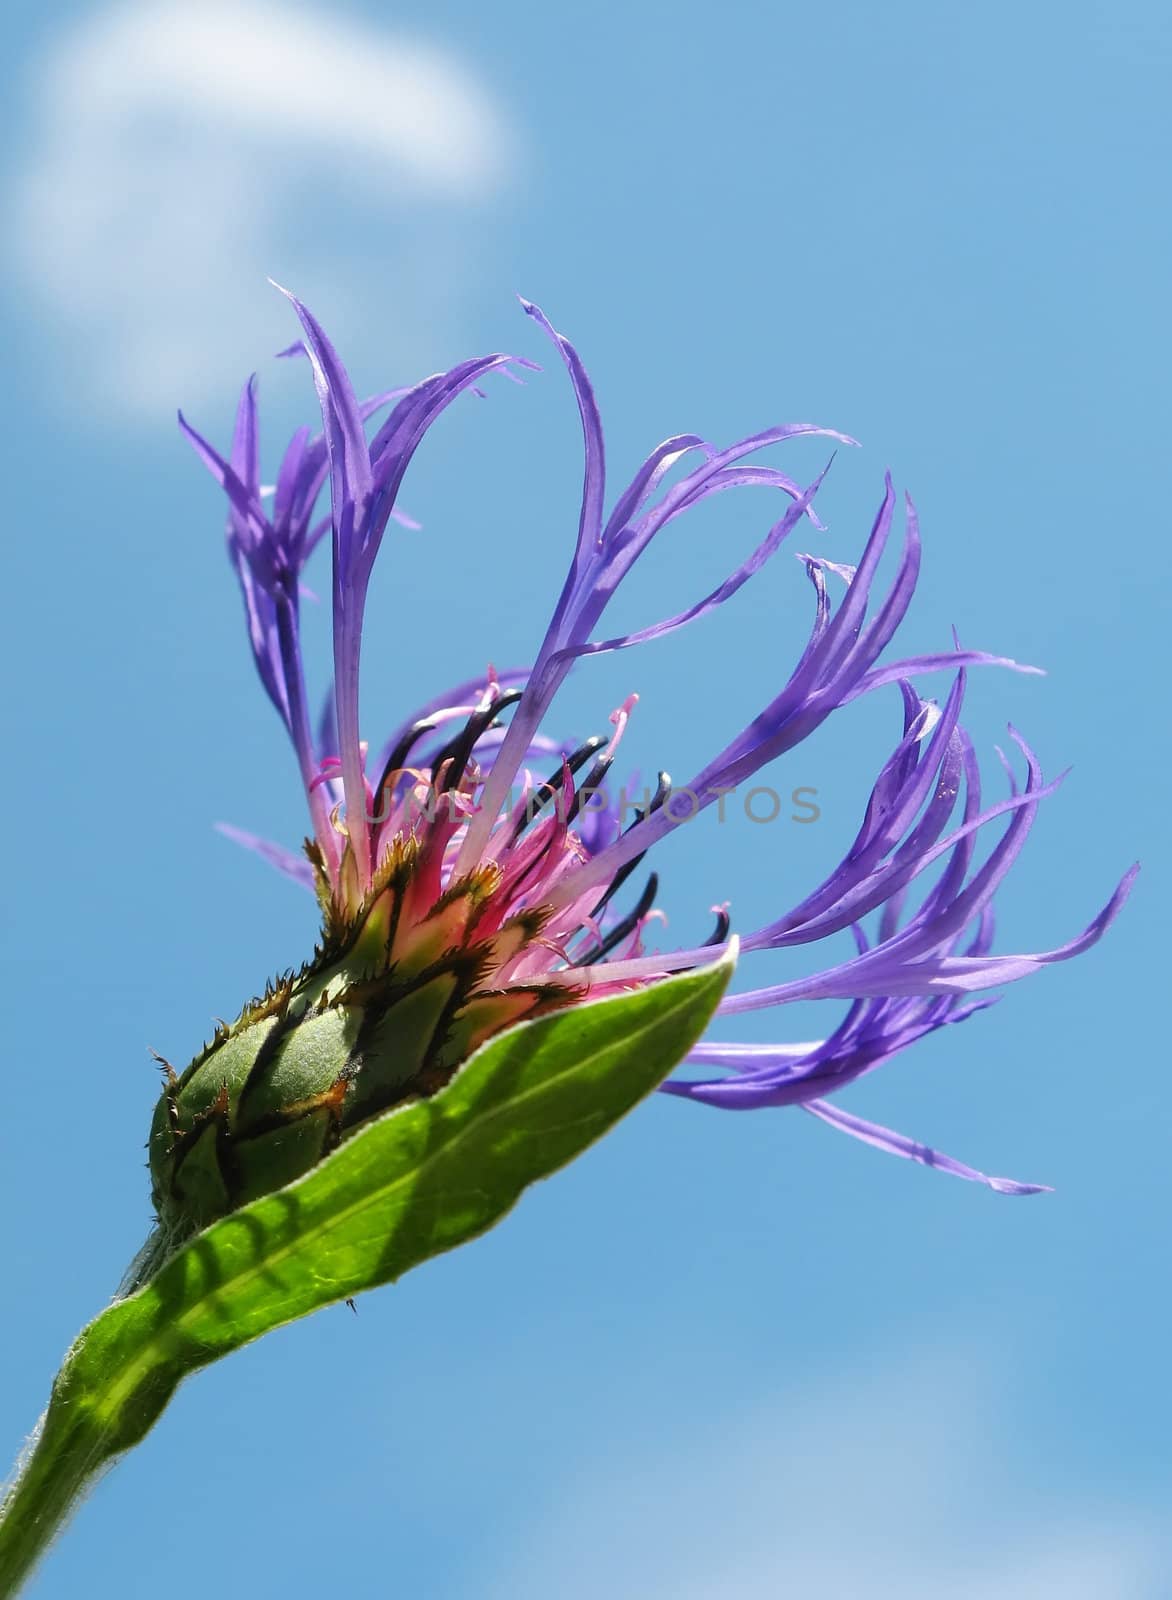 This image shows a cornflower with sky and clouds